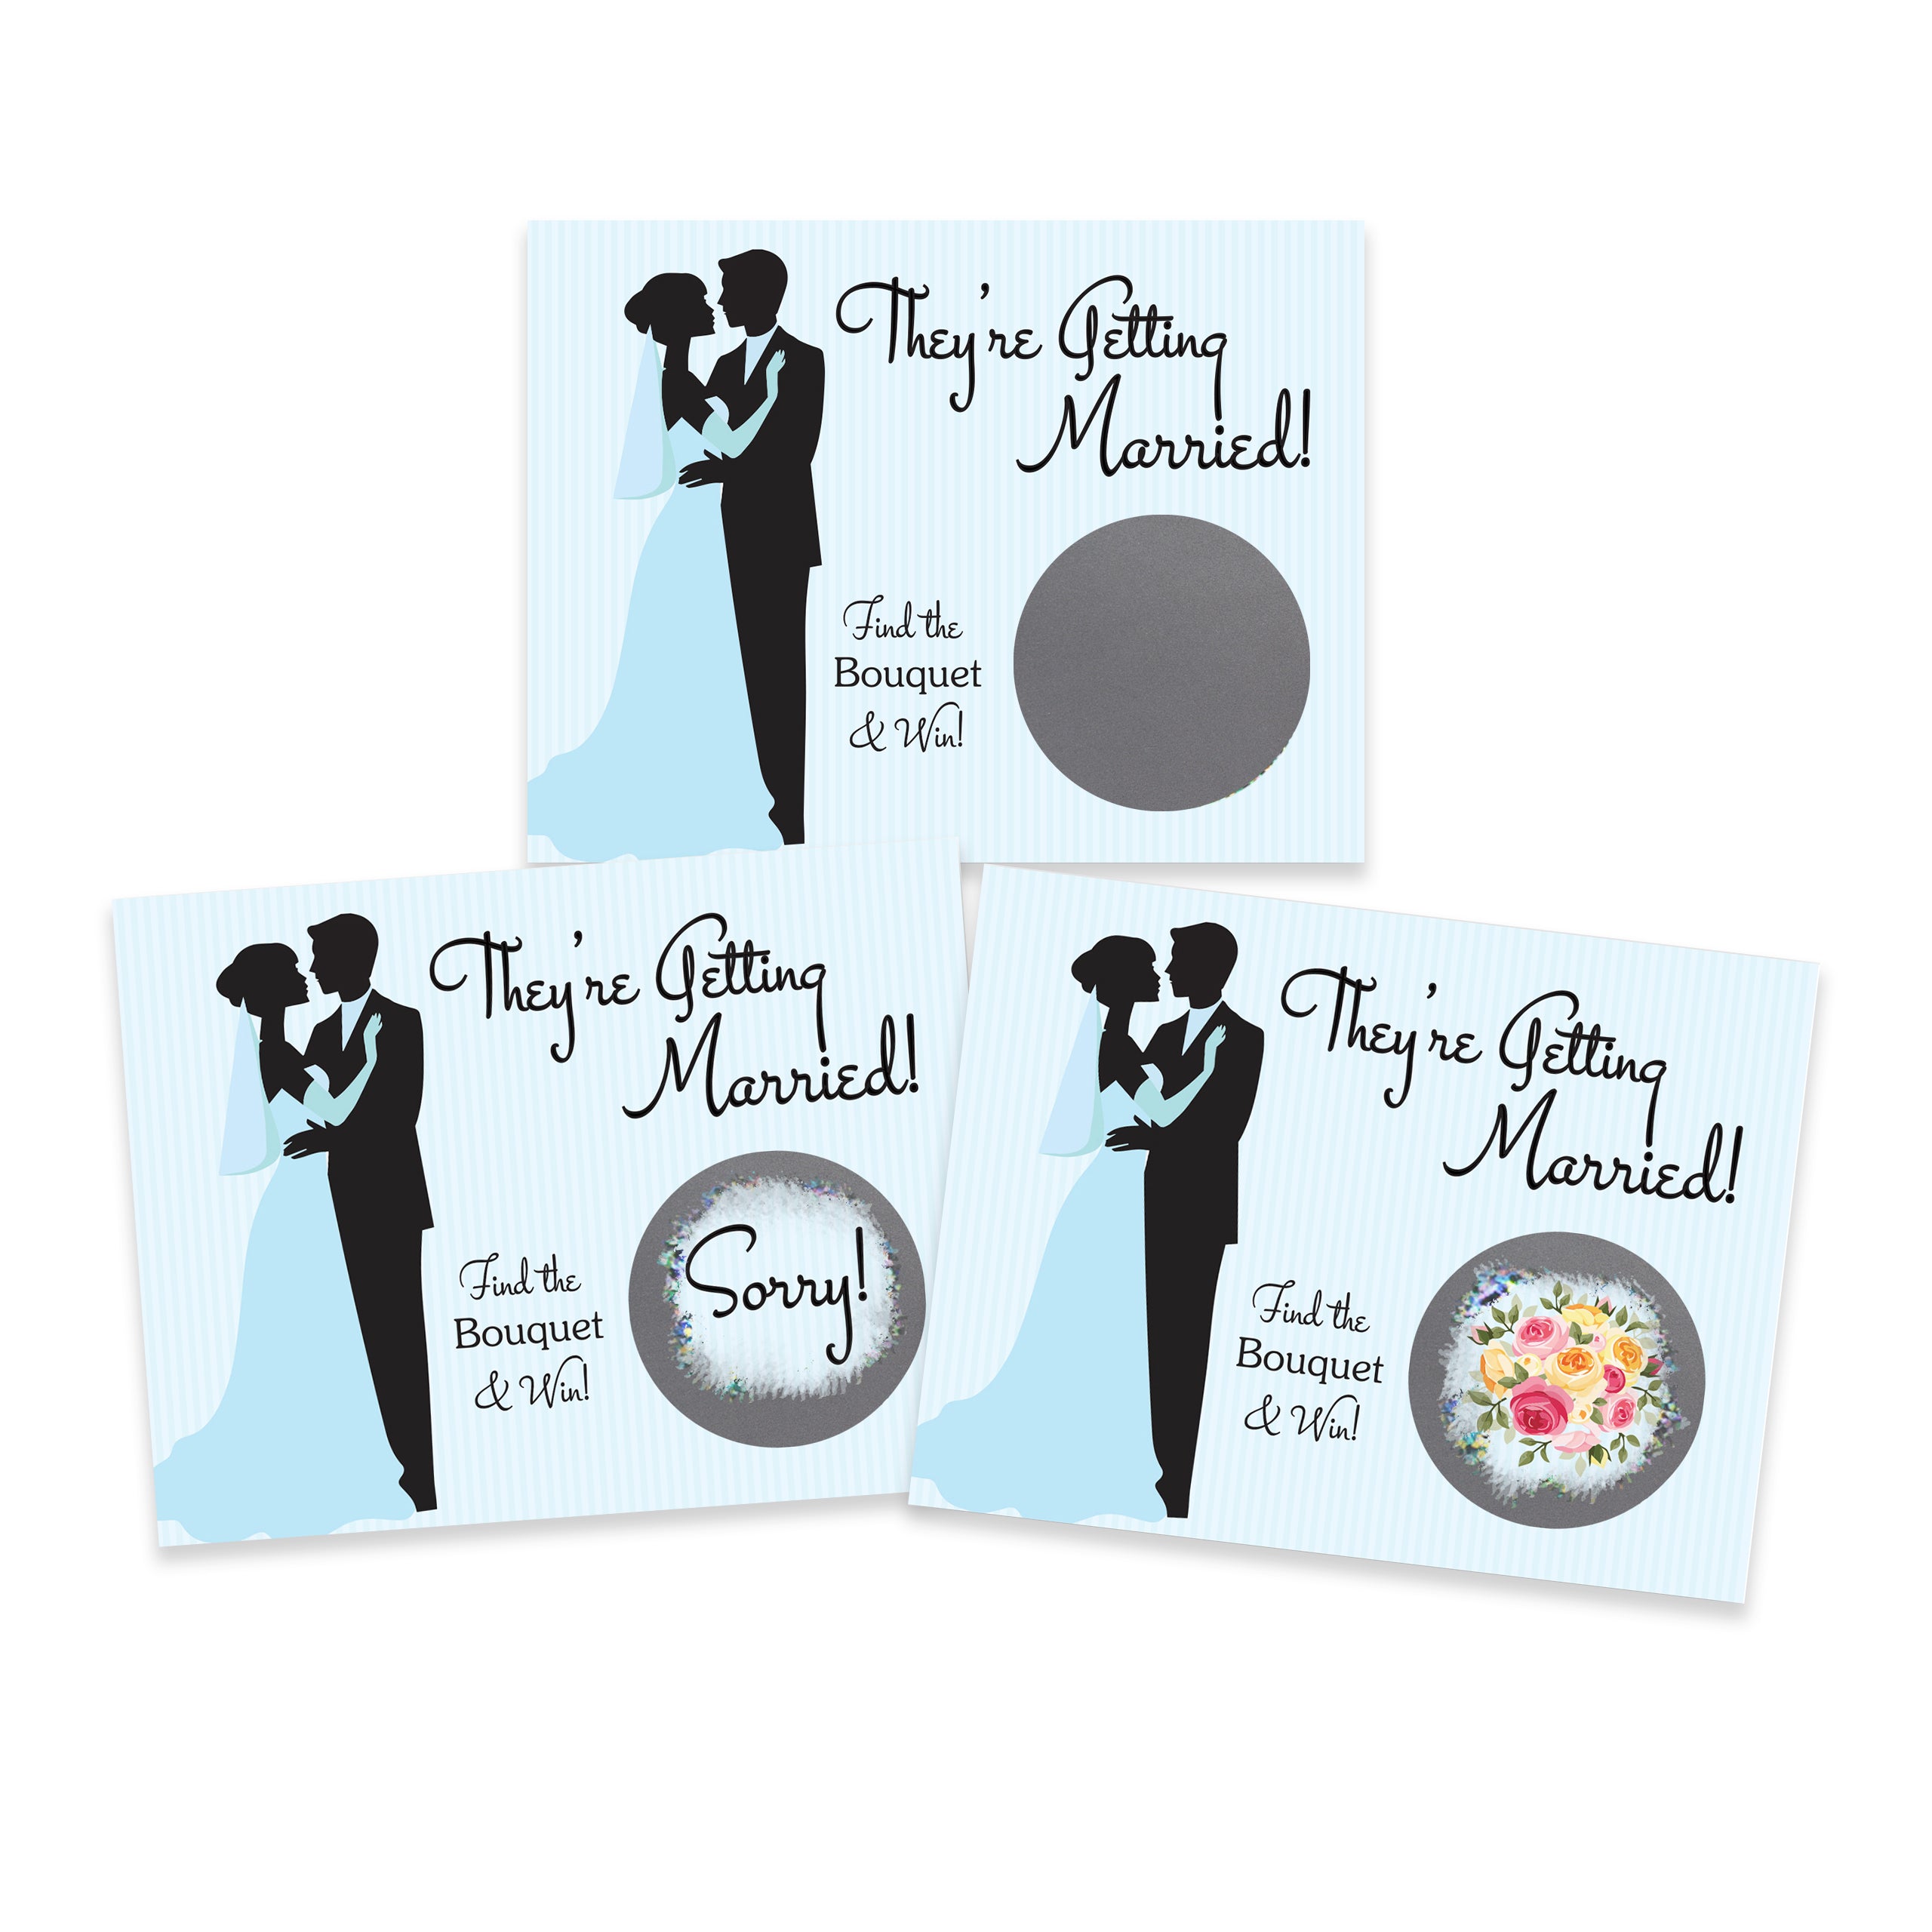 Bride & Groom Blue Pinstripe Getting Married Scratch Off Game Cards 26 Pack - 2 Winning and 24 Non-Winning Cards